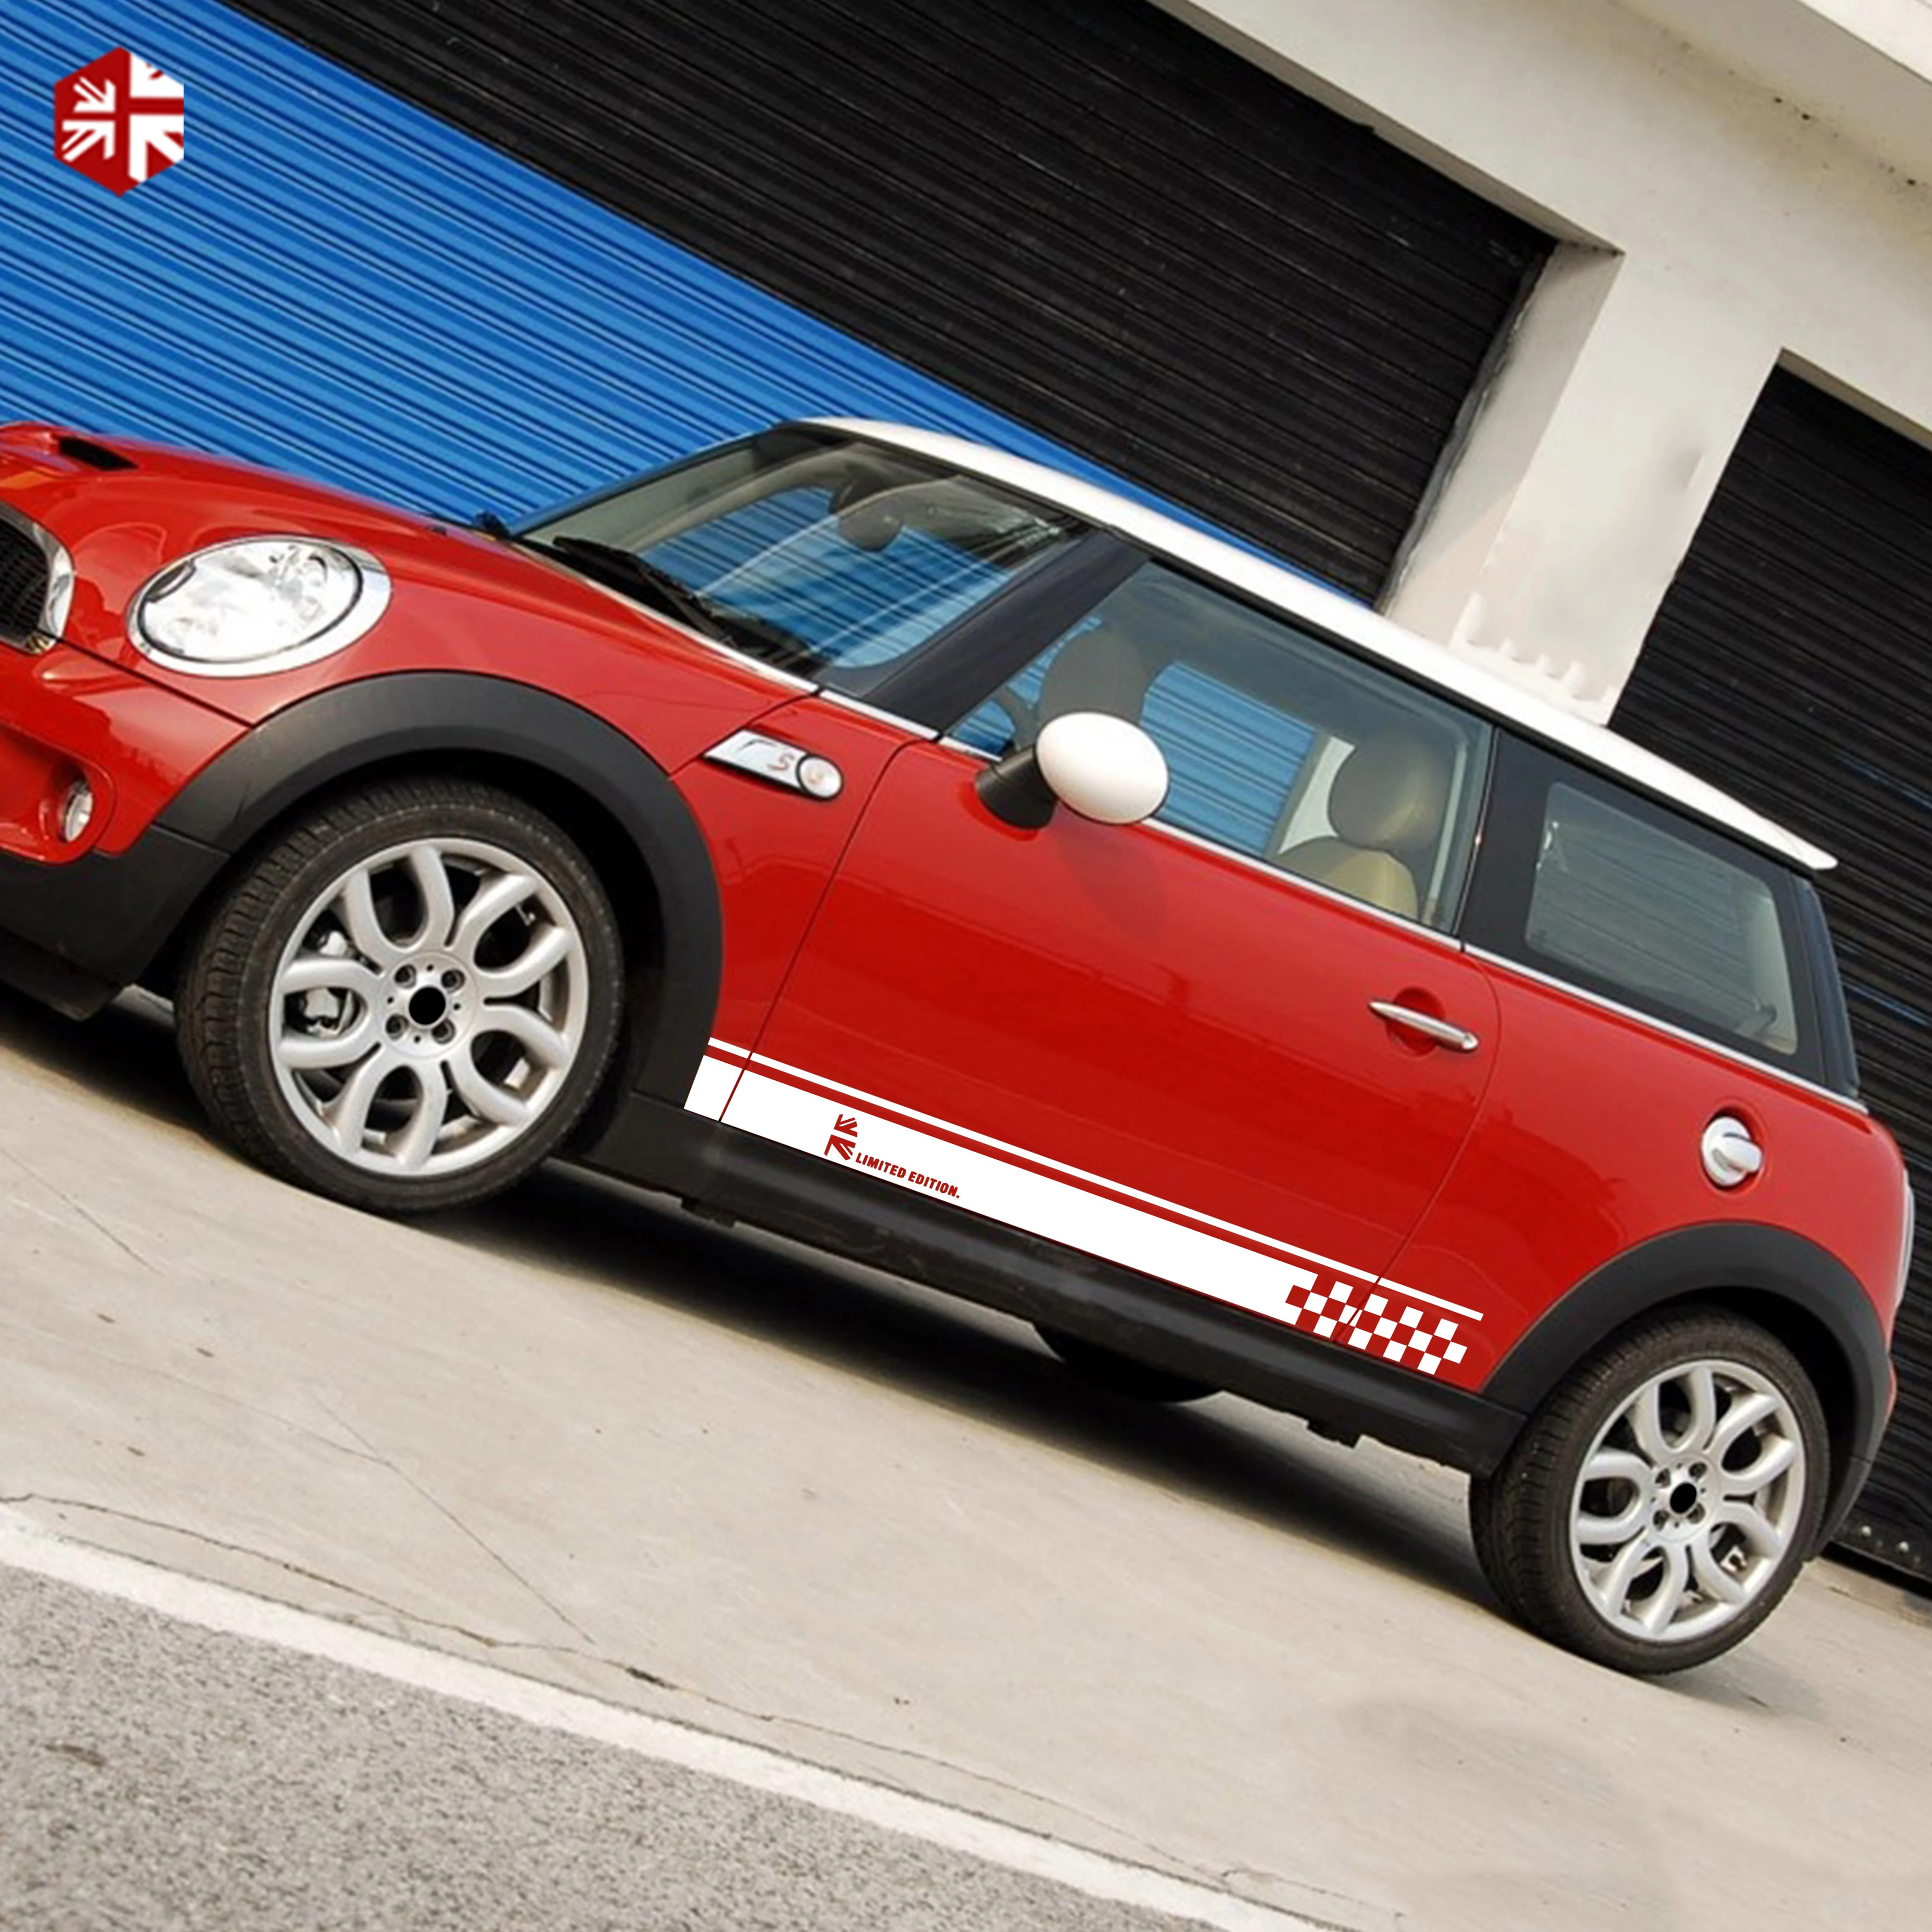 2X Union Jack Styling Car Door Side Stripe Sticker Limited Edition Body Decal For MINI Cooper S One R50 R52 R53 JCW Accessories